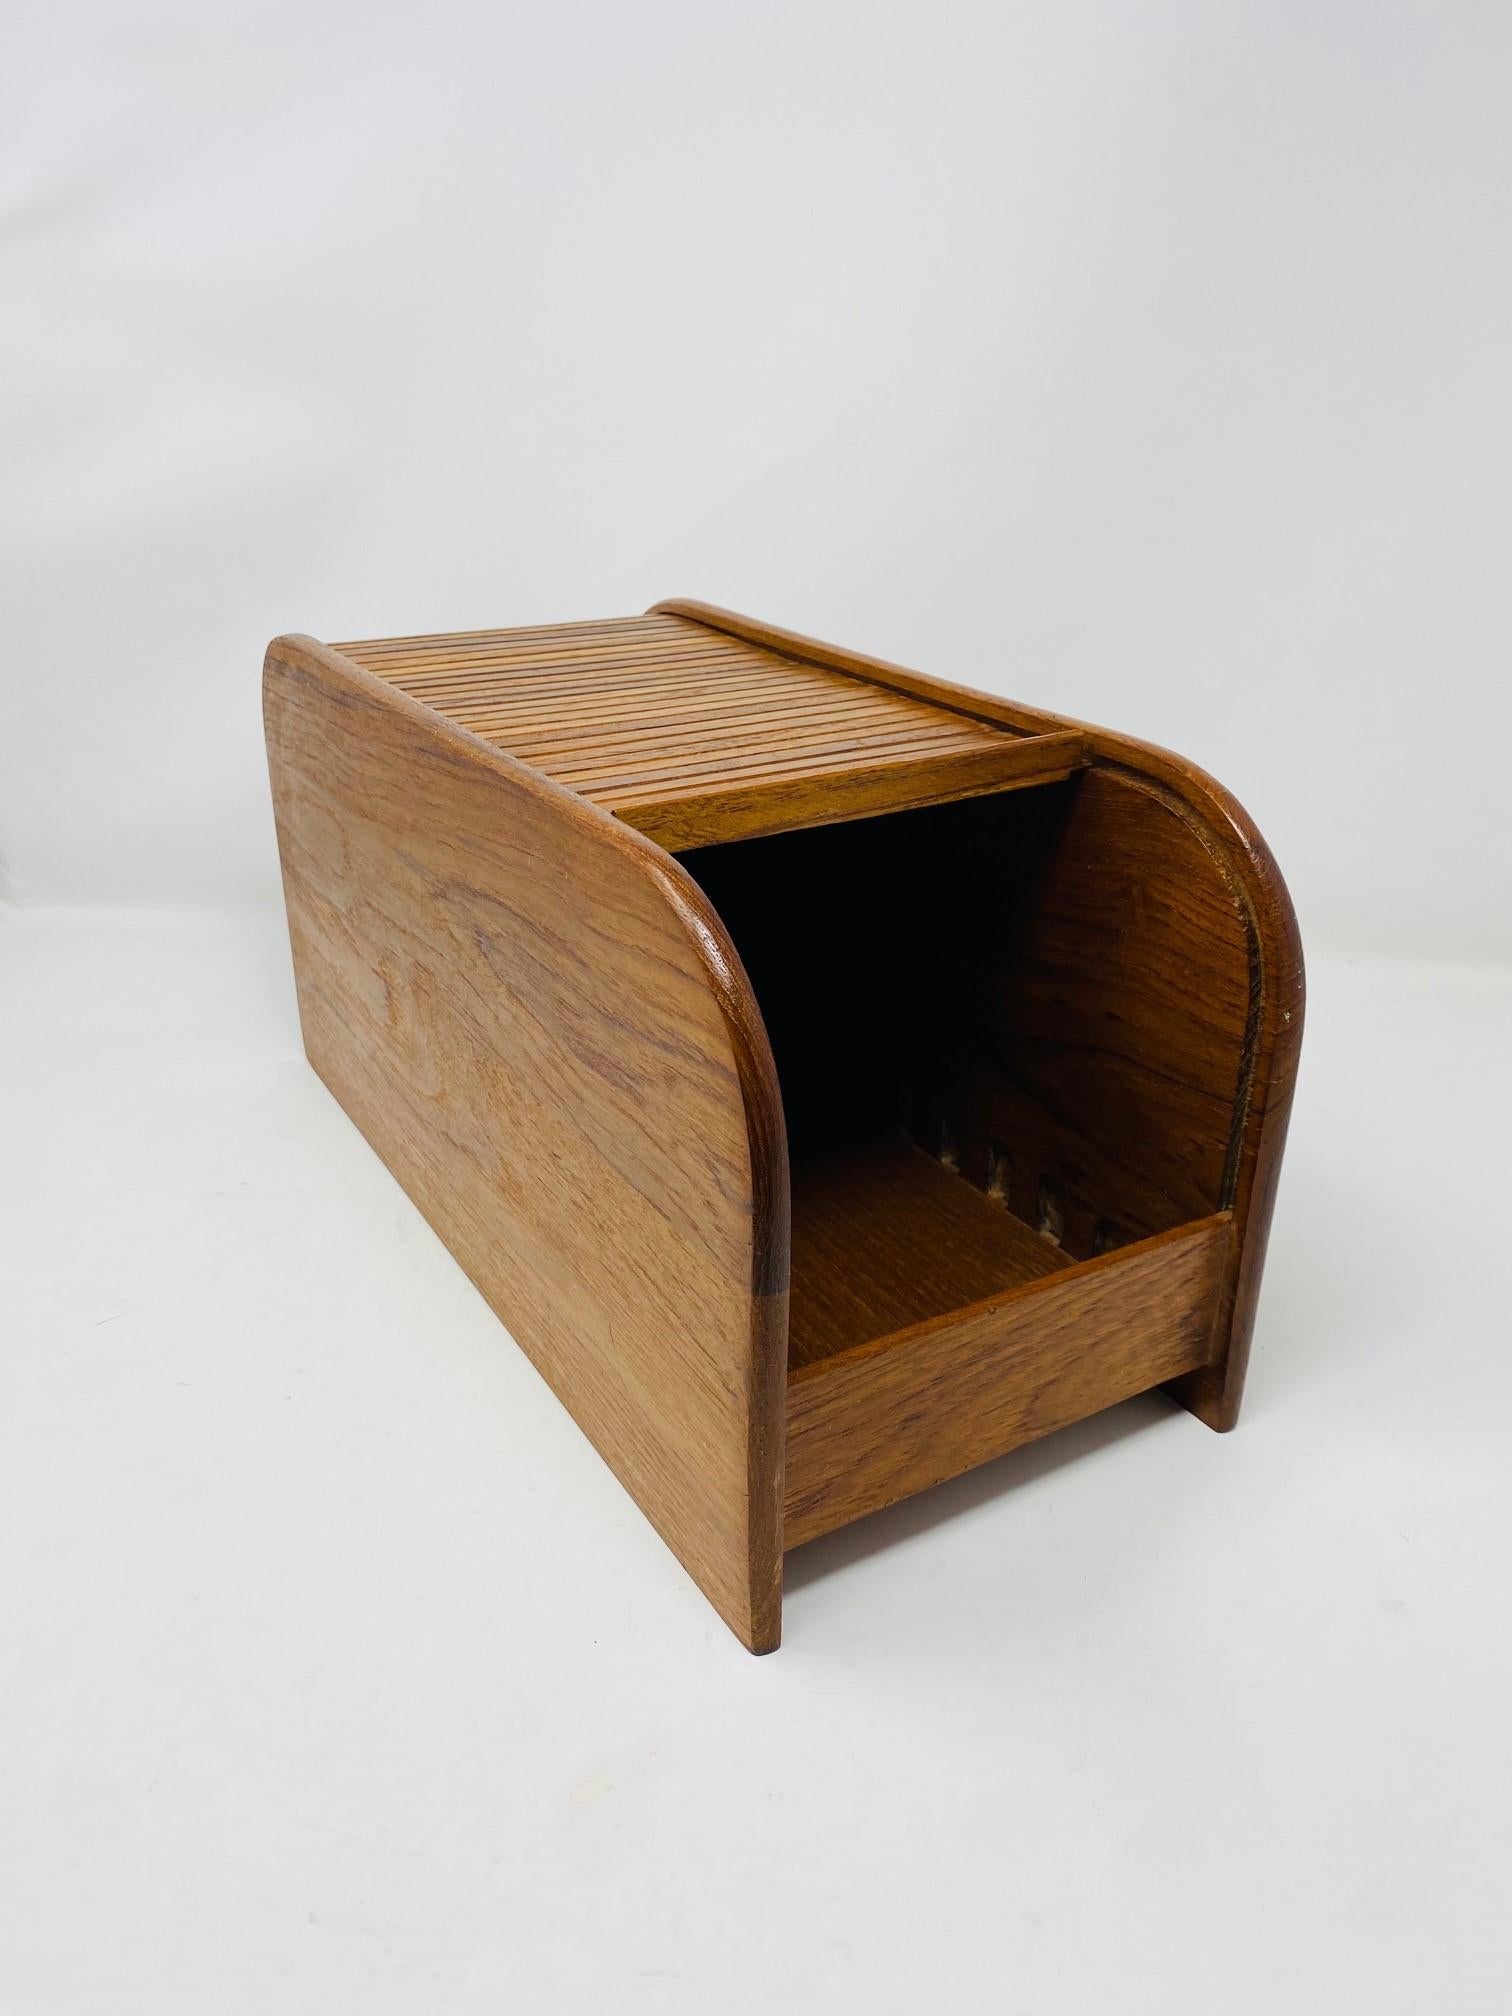 Beautiful storage and organizing box. This vintage piece is similar to Kalmar inc.  This box expresses beauty and form in a precious material. This piece can be used as storage for a variety of purposes. The teak wood adds beauty, form and function.